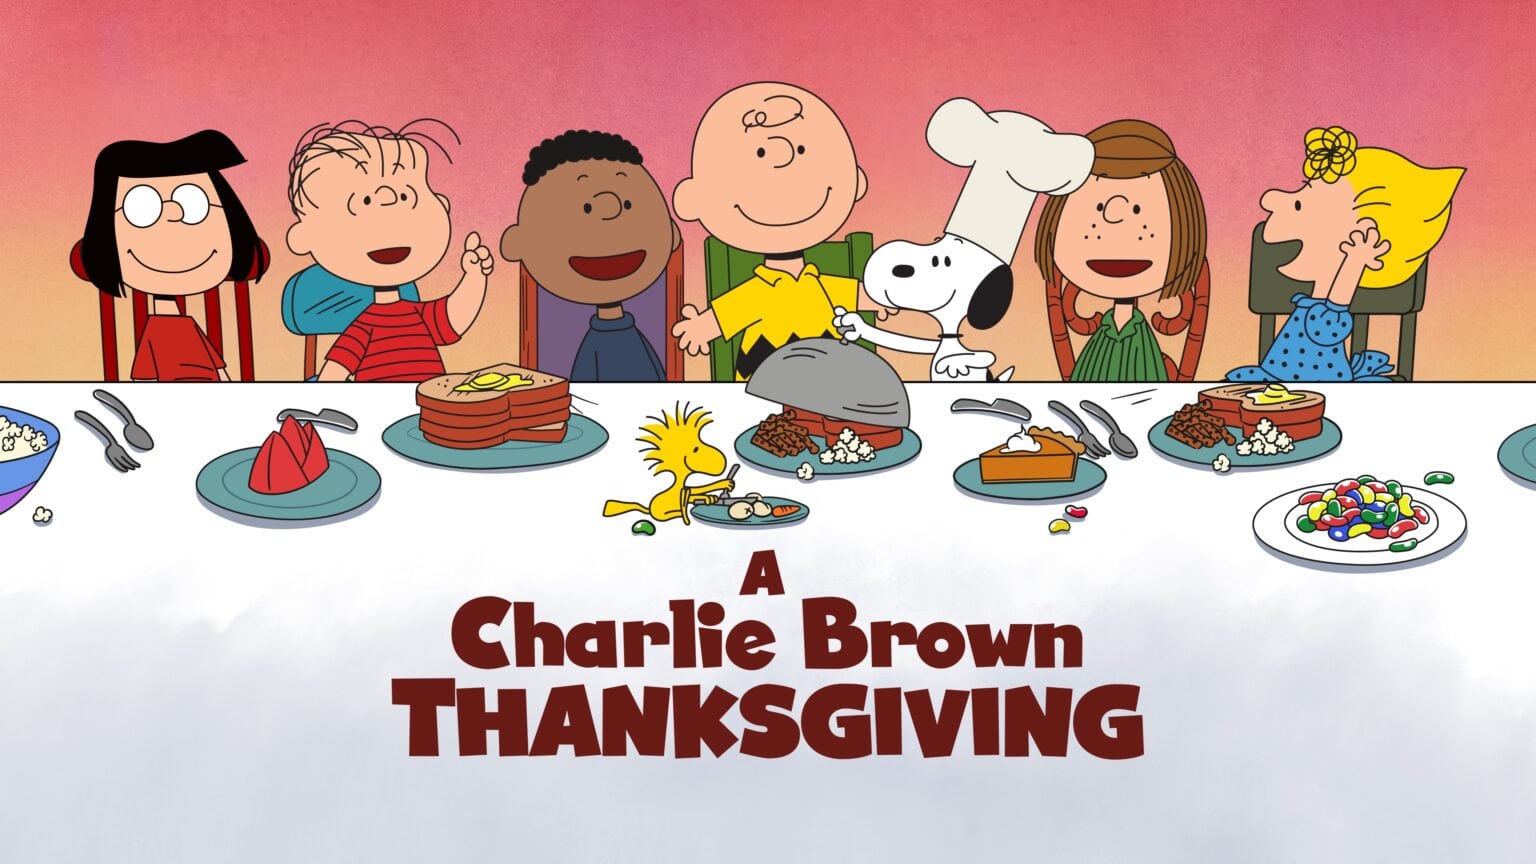 Apple will let PBS broadcast ‘A Charlie Brown Thanksgiving’ for everyone to see.